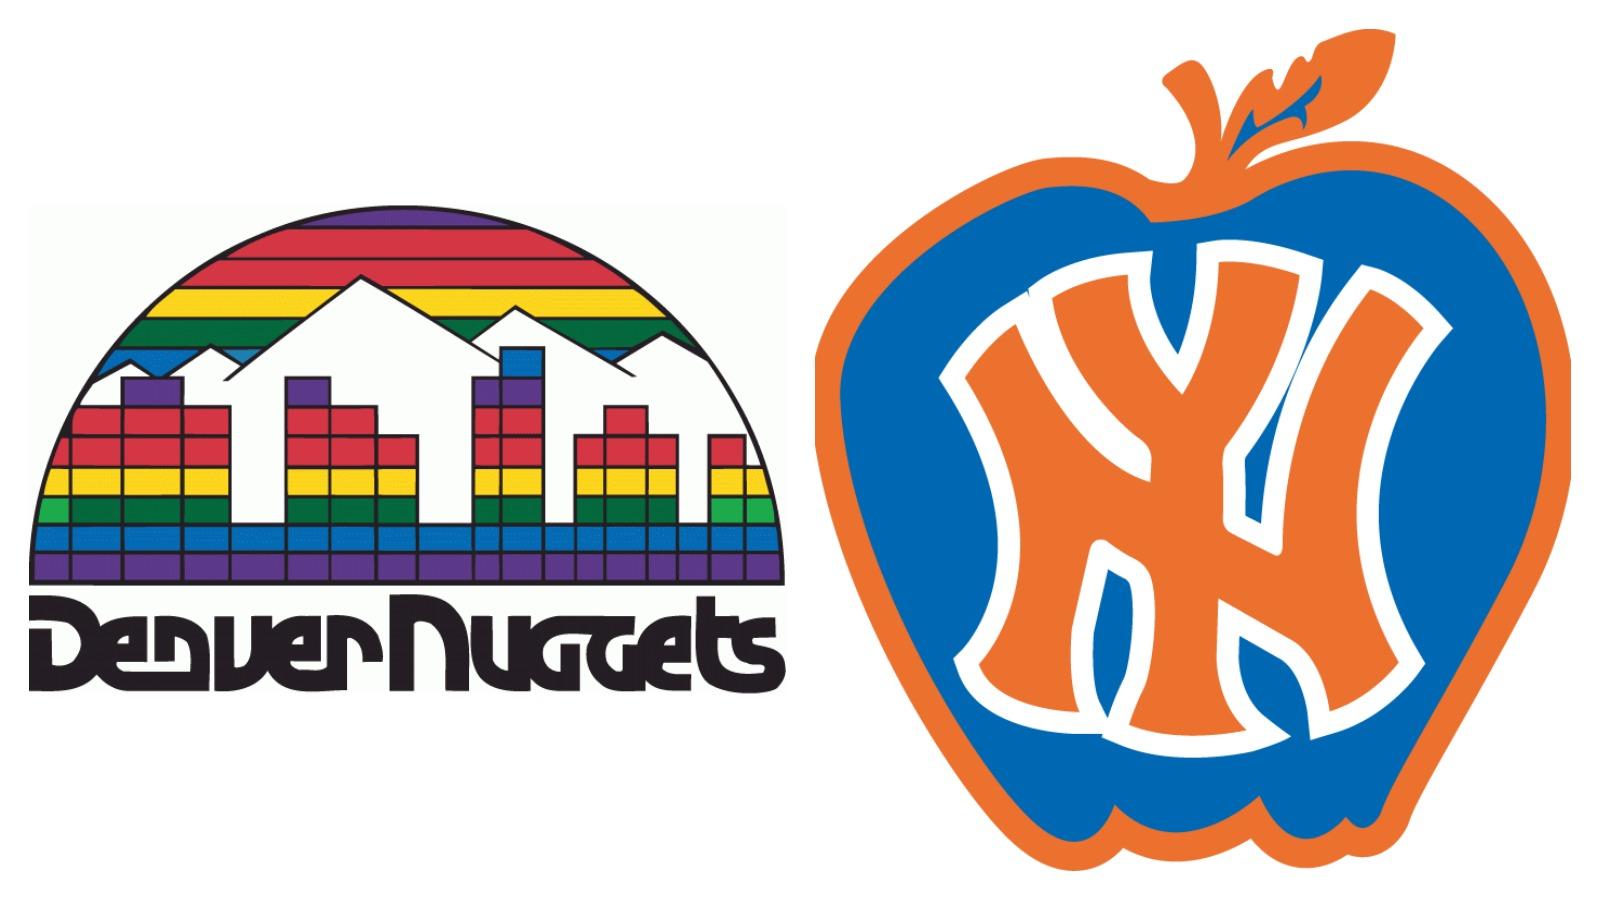 Every NBA team's best logo of all time and their worst, too